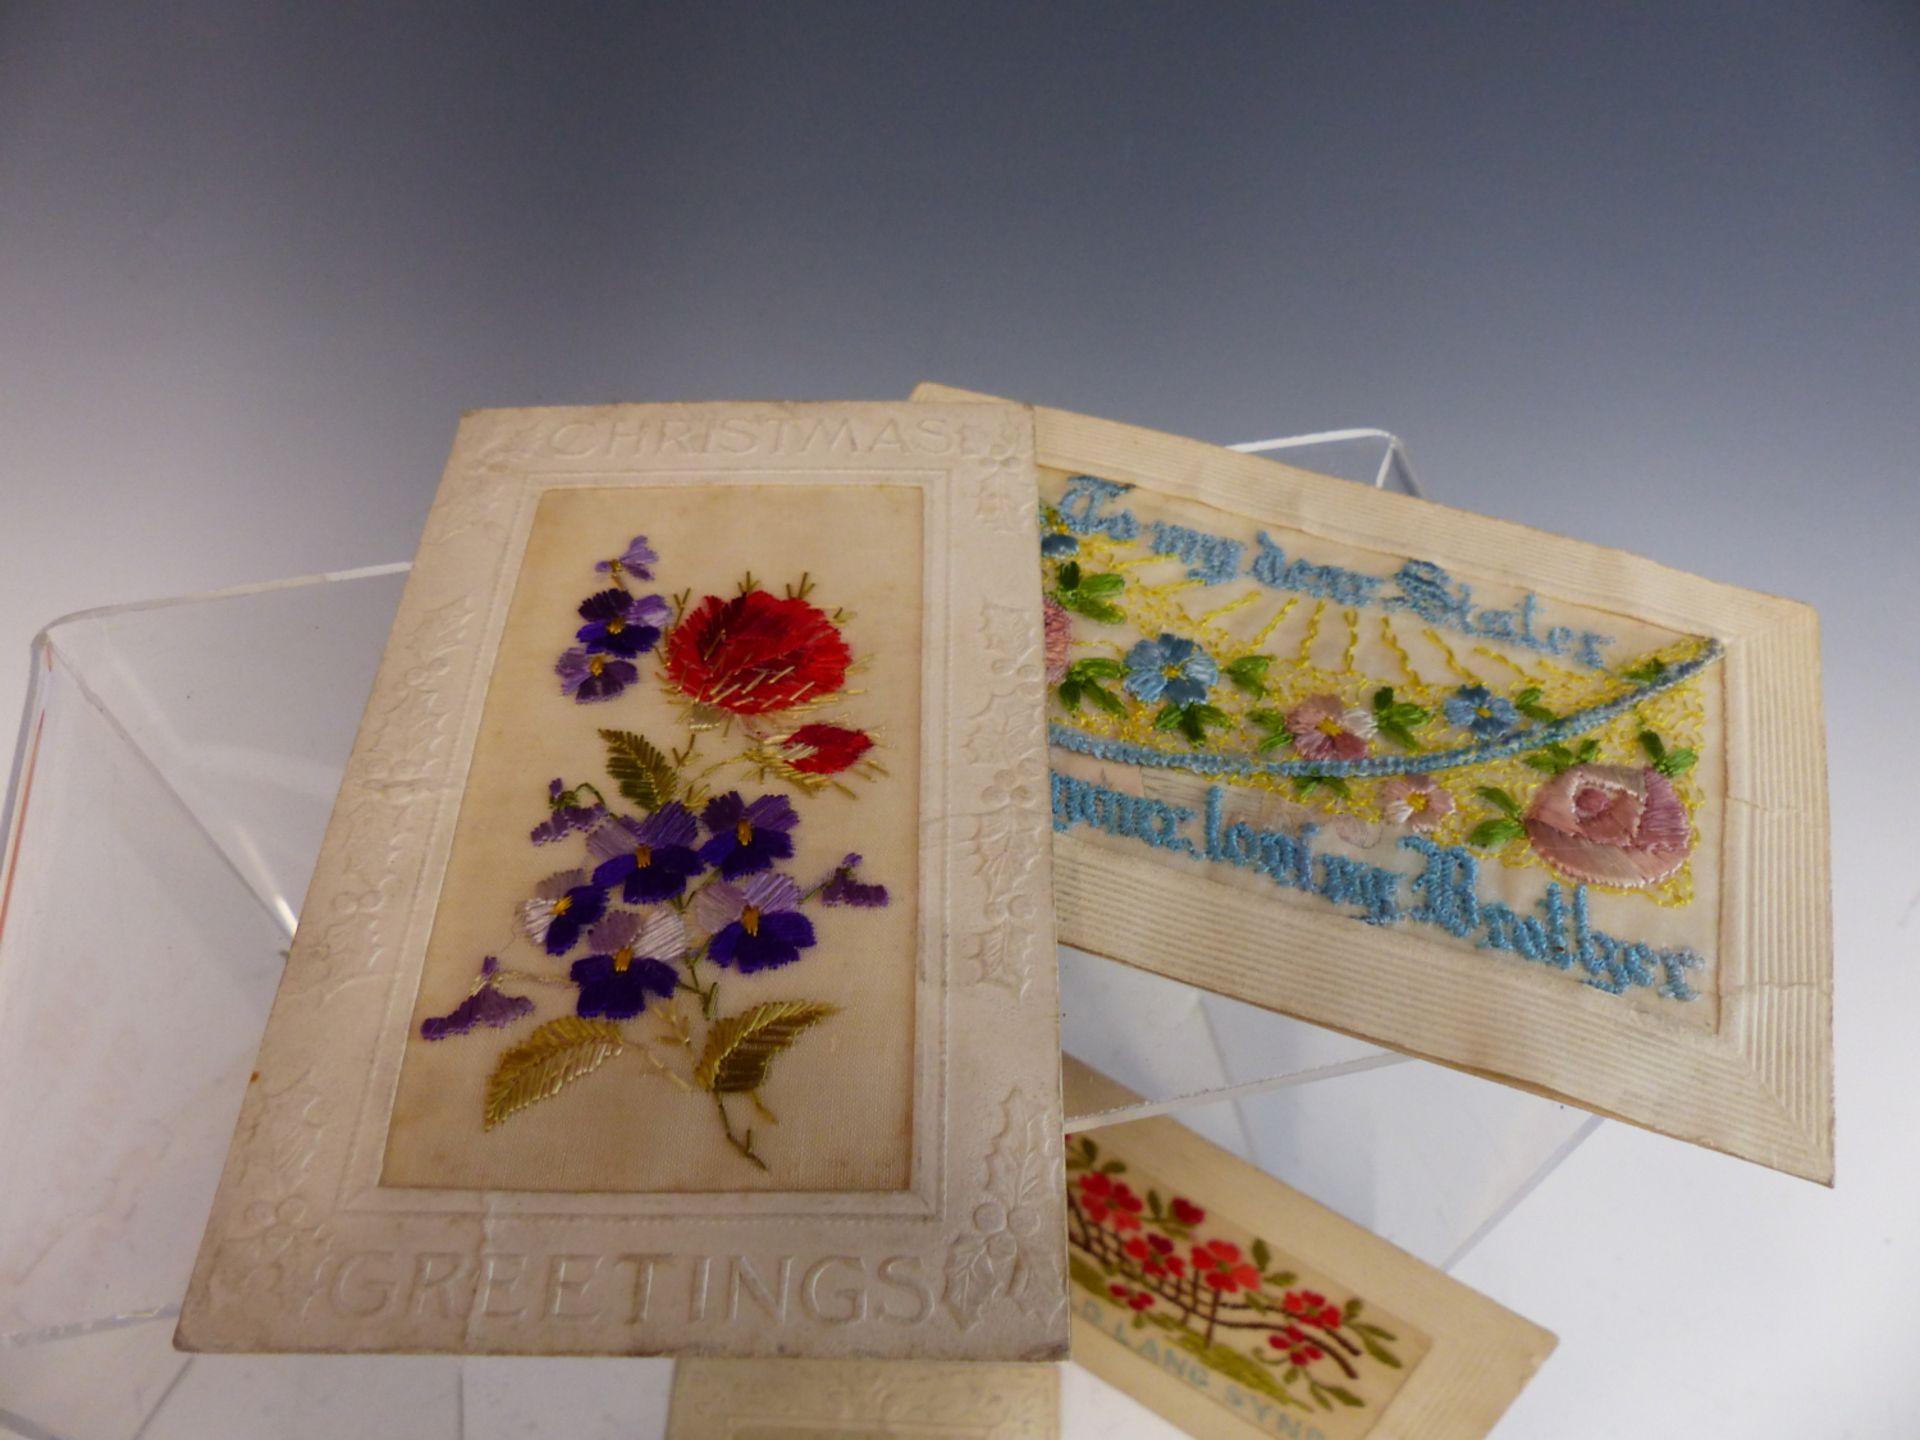 SIX WWI PERIOD SILK EMBROIDERED SWEETHEART POSTCARDS AND AN ARABIC COIN WITH A NOTE STATING "GIFT - Image 5 of 10